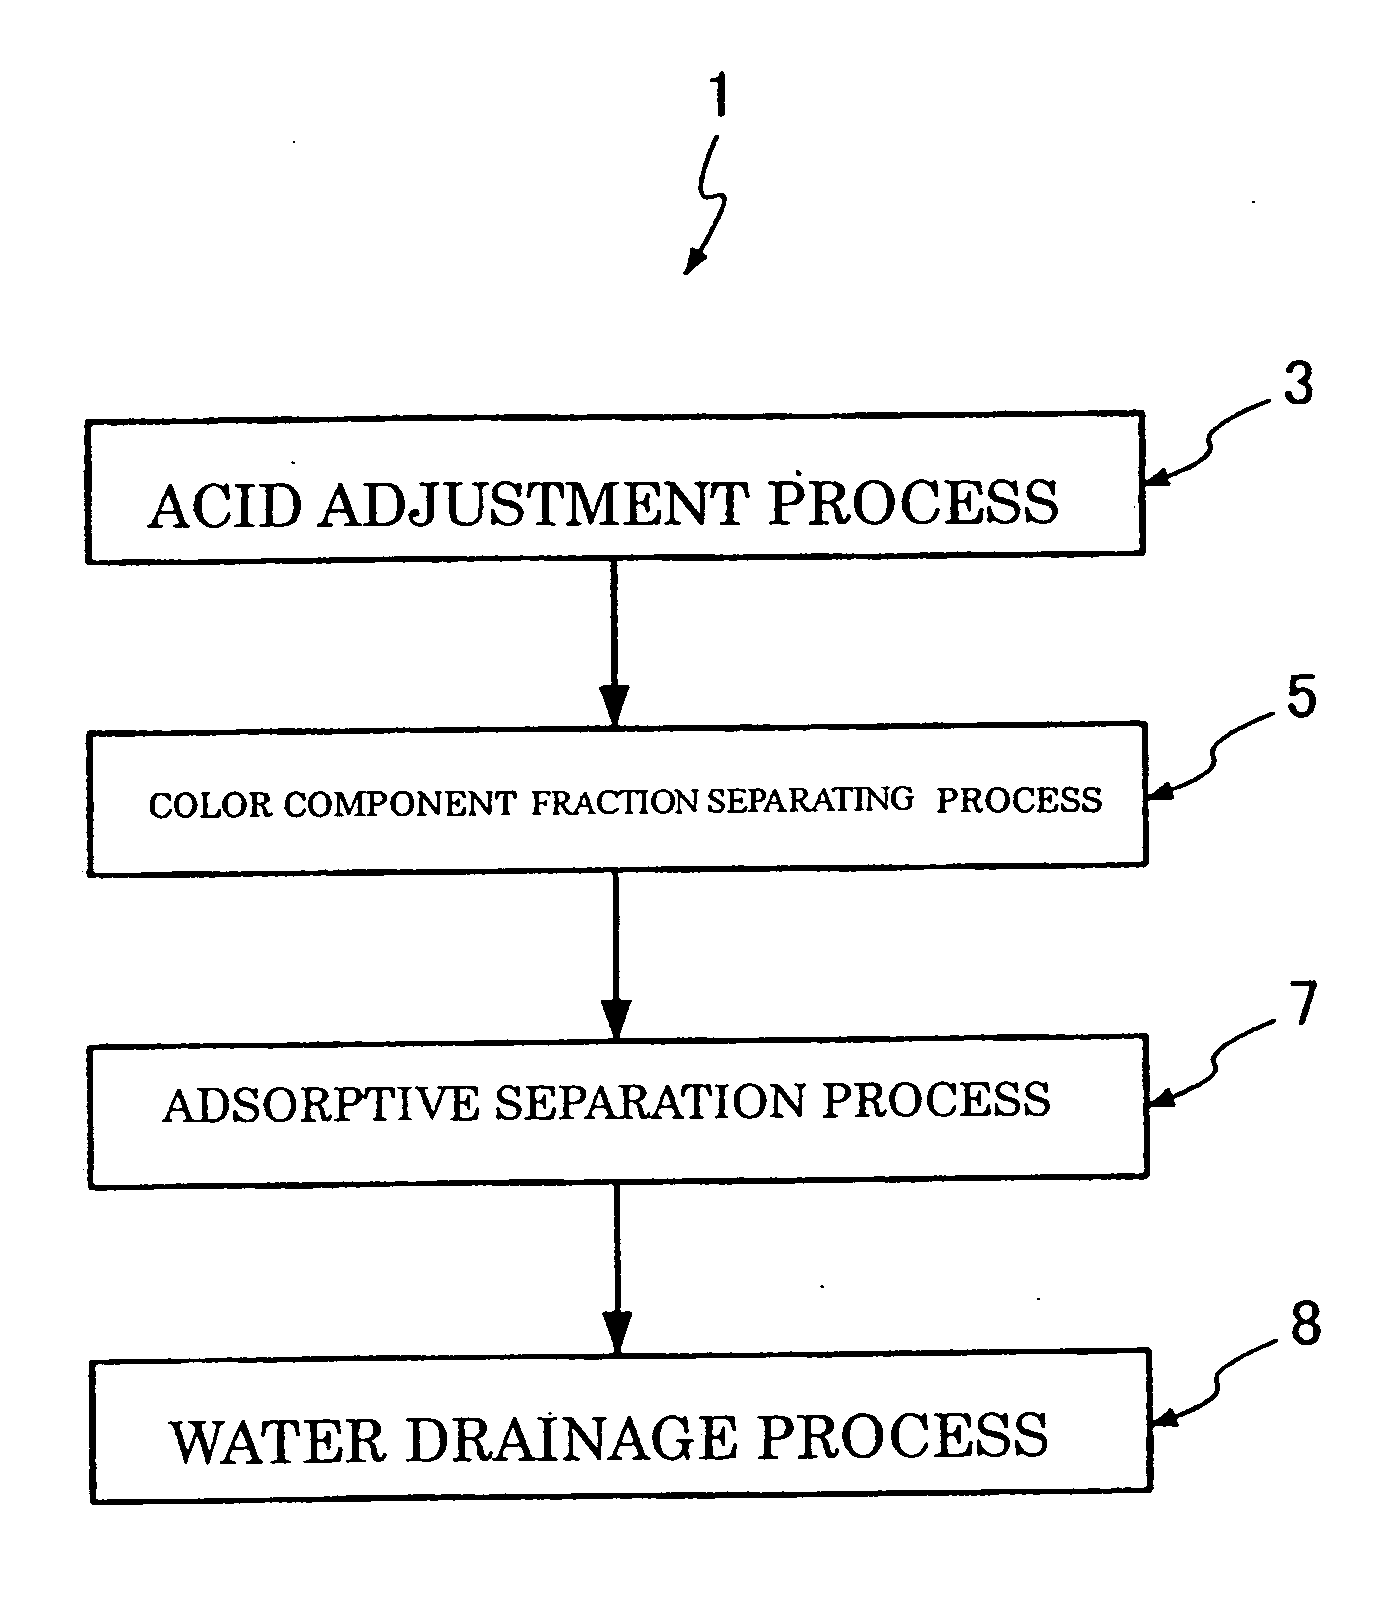 Colored wastewater discoloration method